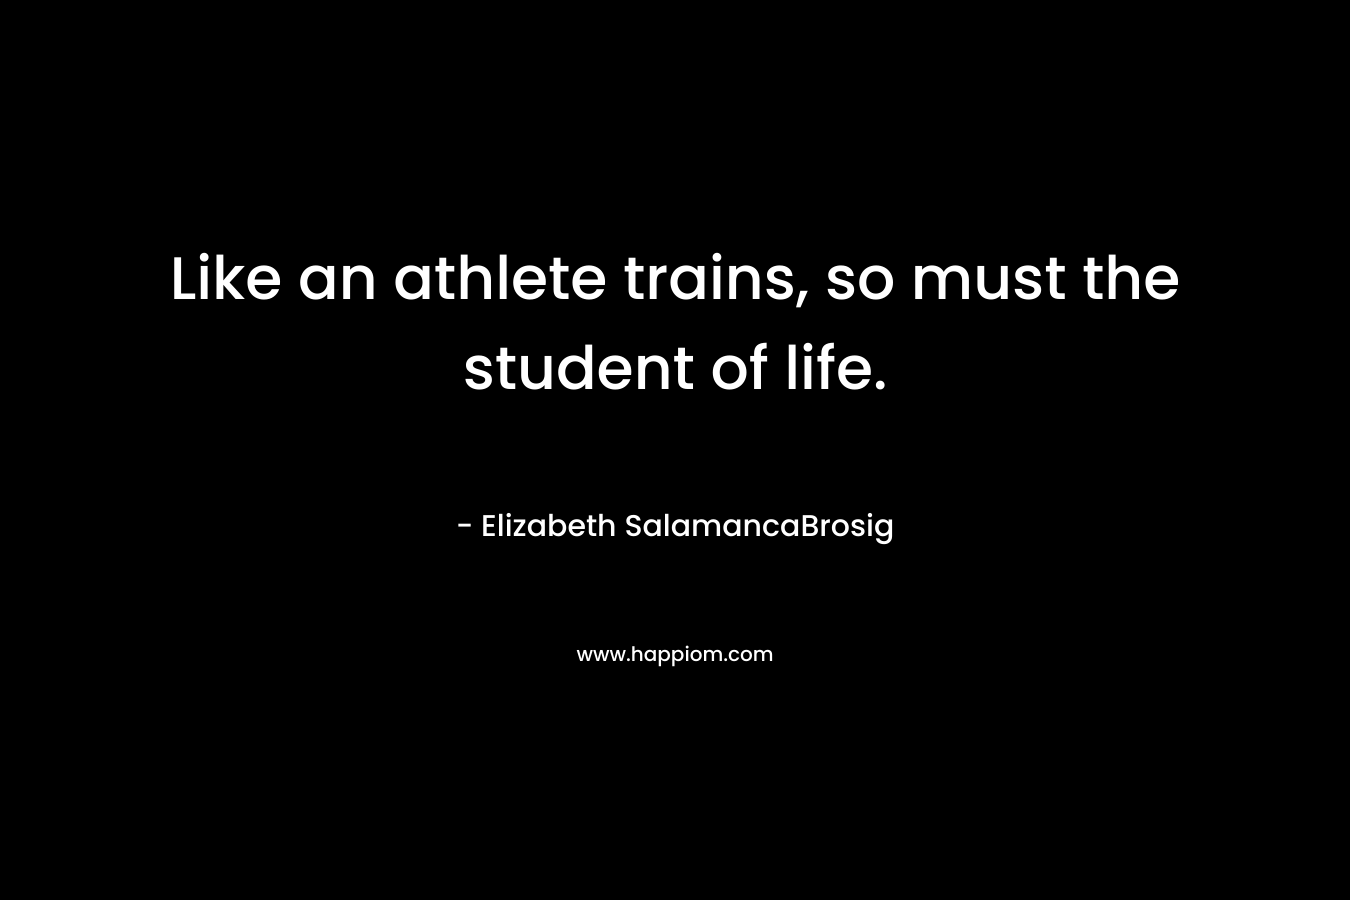 Like an athlete trains, so must the student of life. – Elizabeth SalamancaBrosig